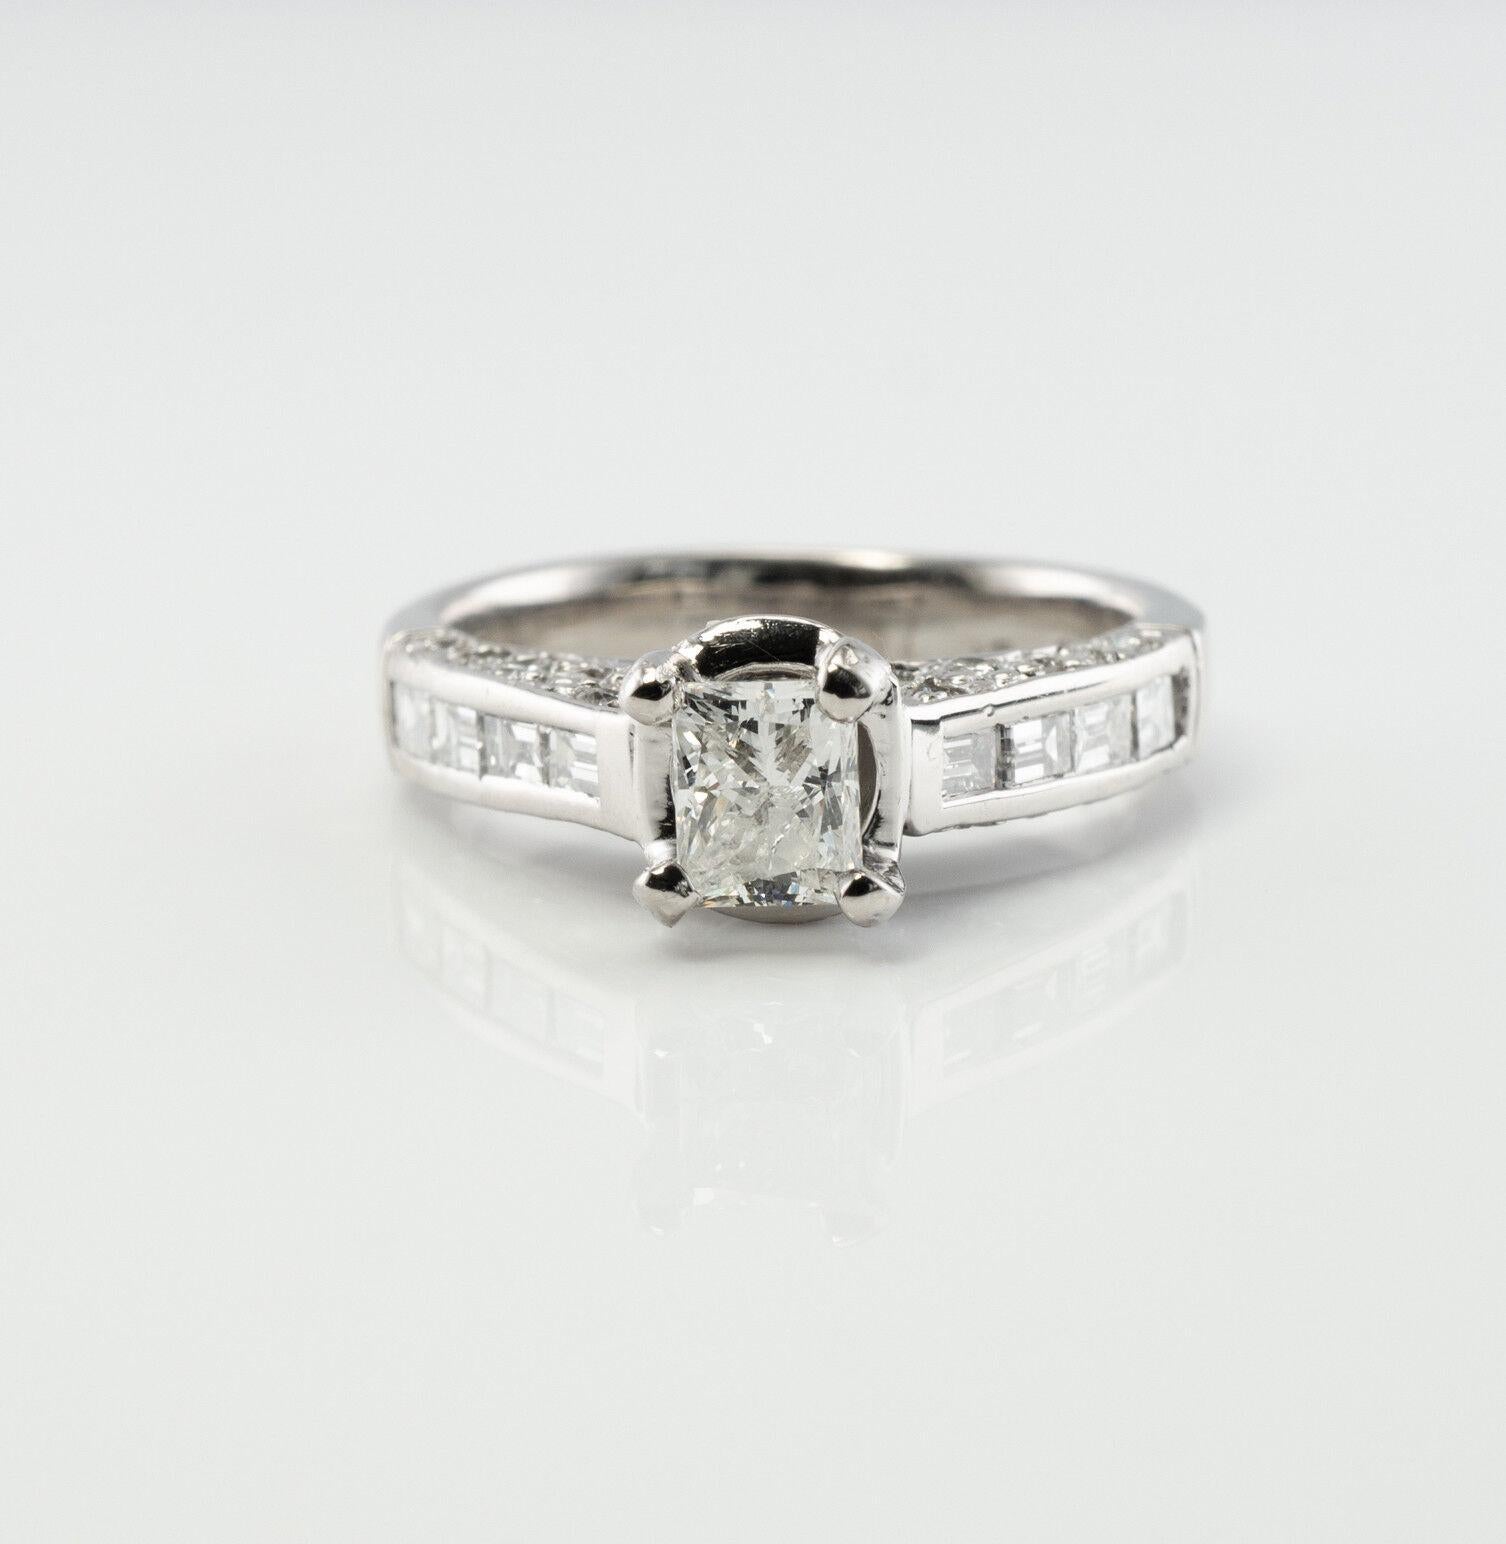 Engagement Diamond Ring Platinum Band 1.40 TDW EGL Certified

This incredible ring is finely crafted in solid Platinum and set with genuine sparkling diamonds. The center diamond has an EGL certificate stating this is .52ct gem of VS2 clarity and G